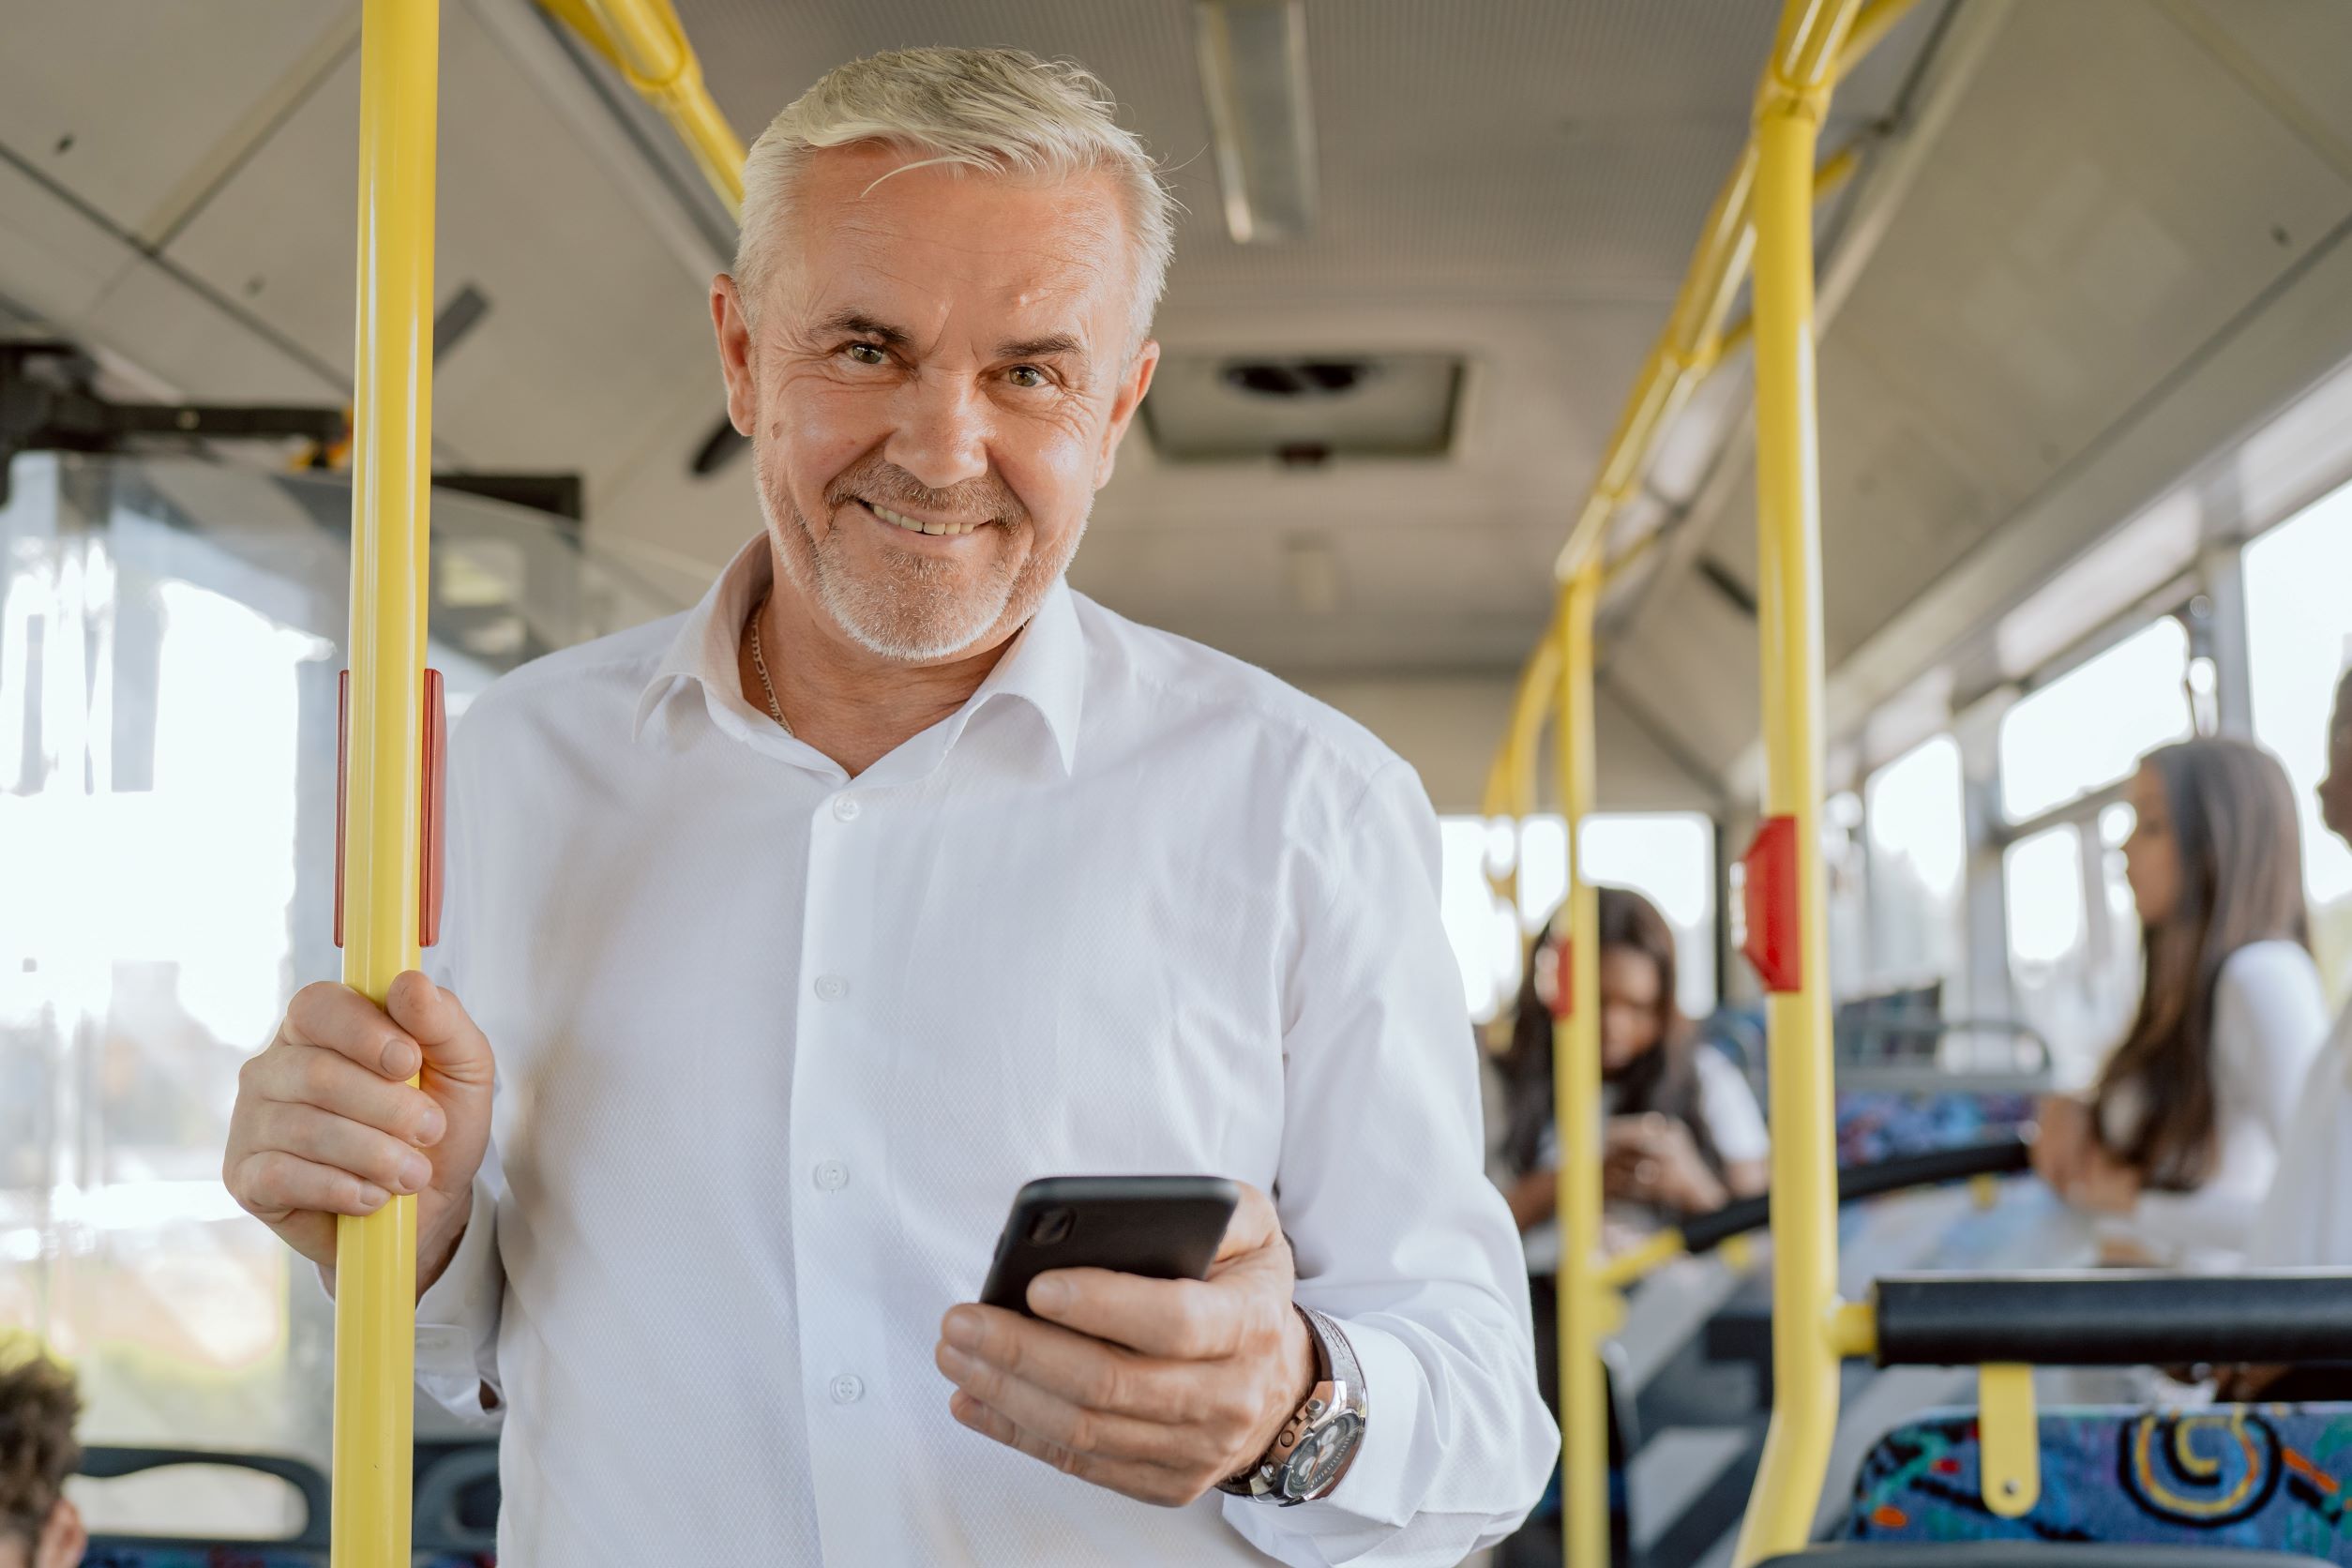 Smiling Middle Aged Man Holding Smartphone On Bus